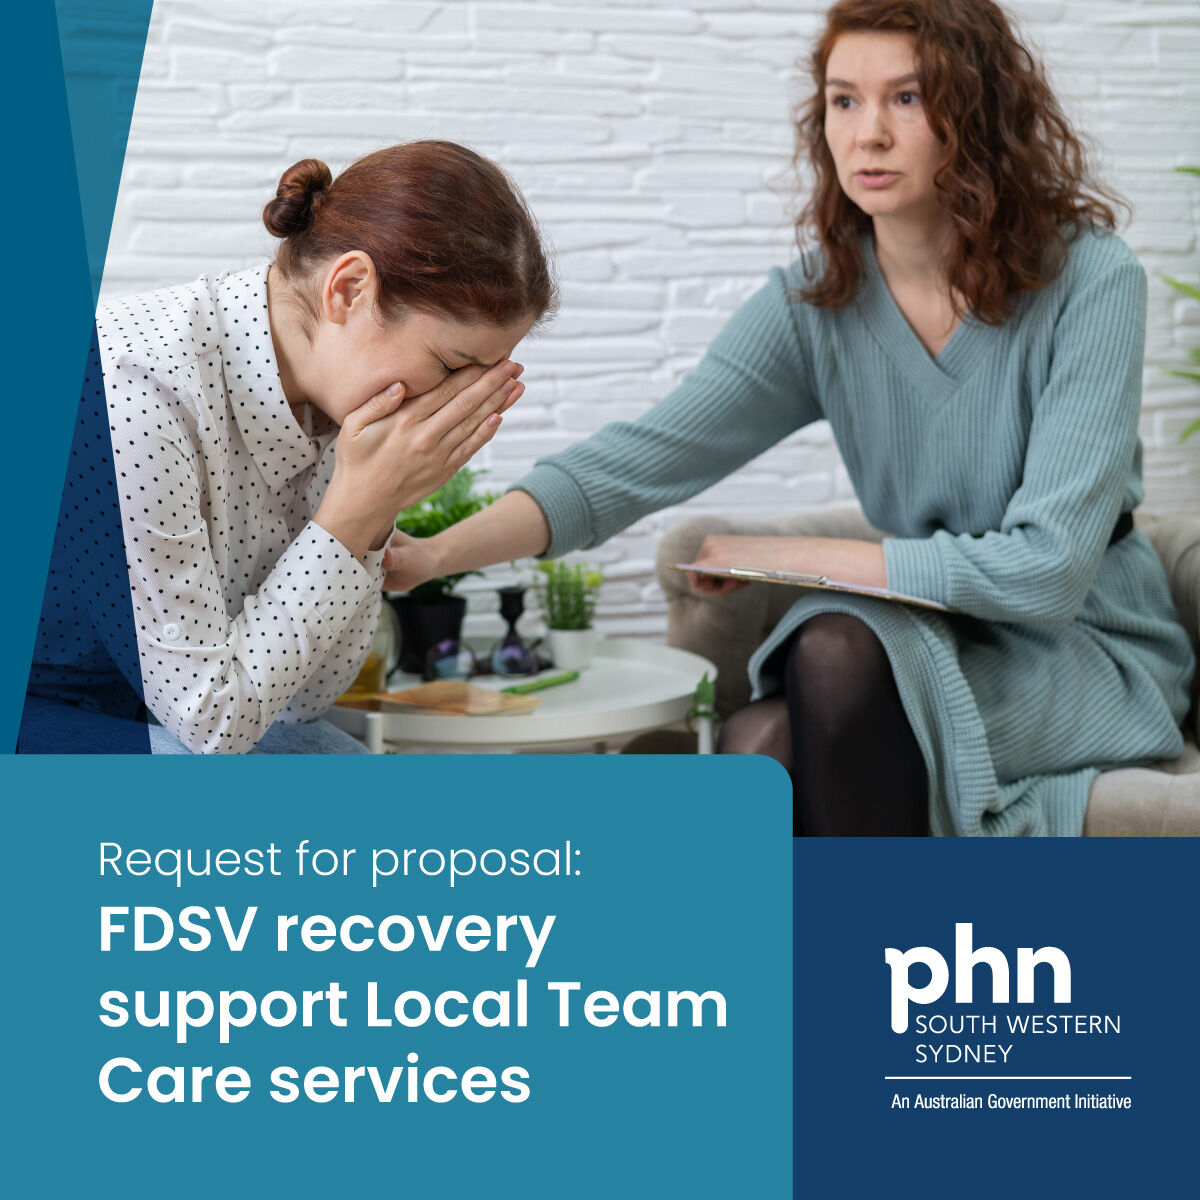 RFP closes 5pm, Monday, 15 April There is 1 more week to lodge an RFP to provide Local Care Team services for recovery care of victim-survivors of family, domestic and sexual violence. Applications accepted via Tenderlink. More details on our website➡️ bit.ly/49SrGia